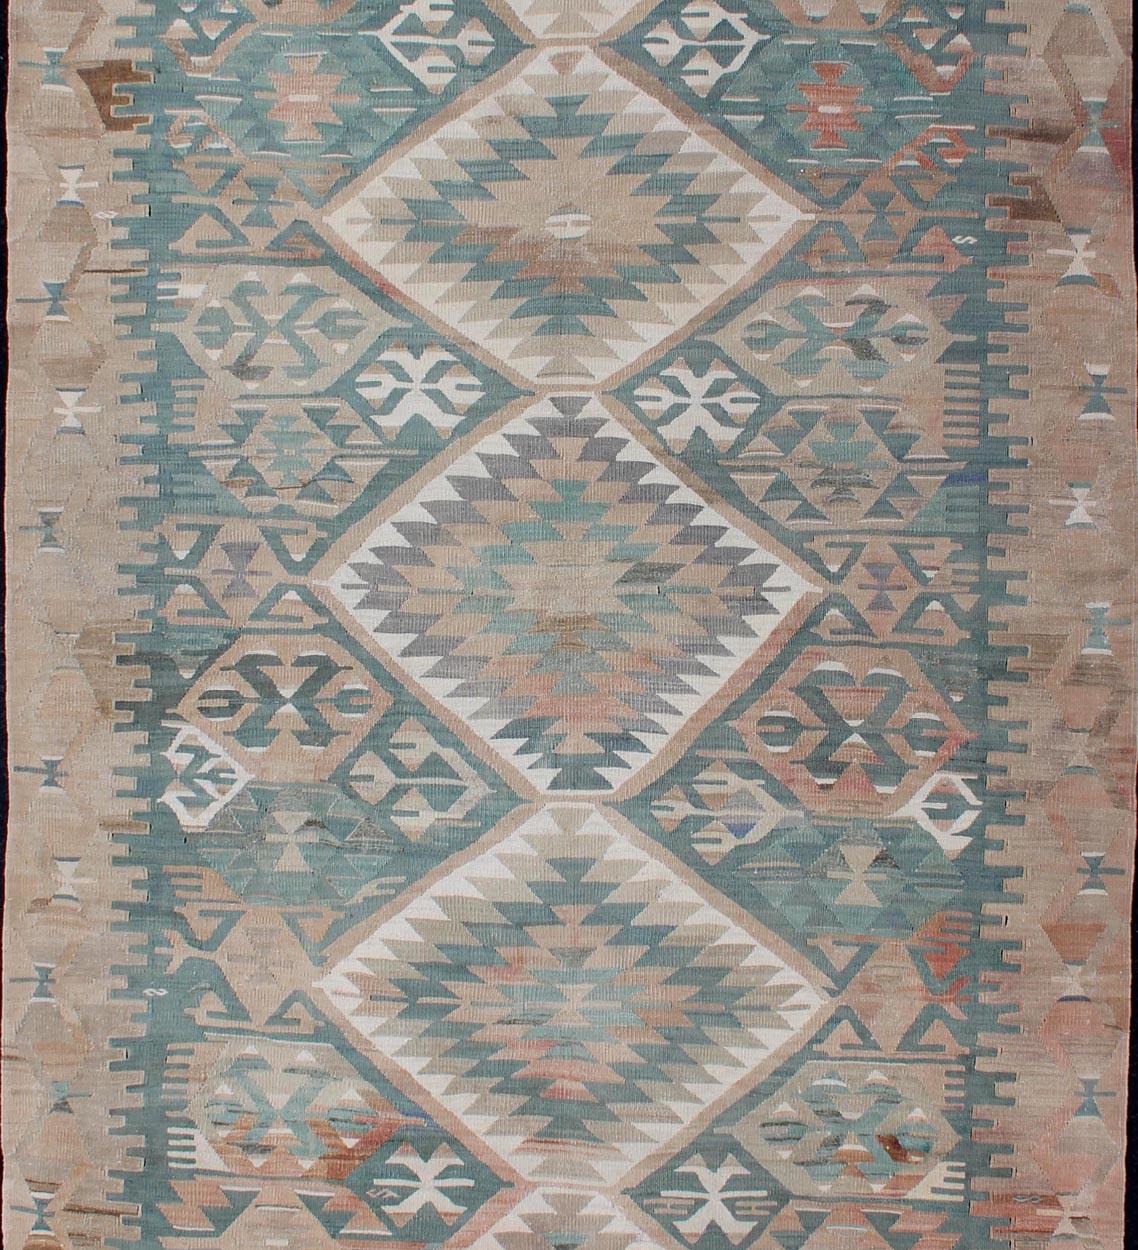 Hand-Woven Geometric Design Vintage Turkish Tribal Flat-Weave Rug in Teal and Neutrals For Sale